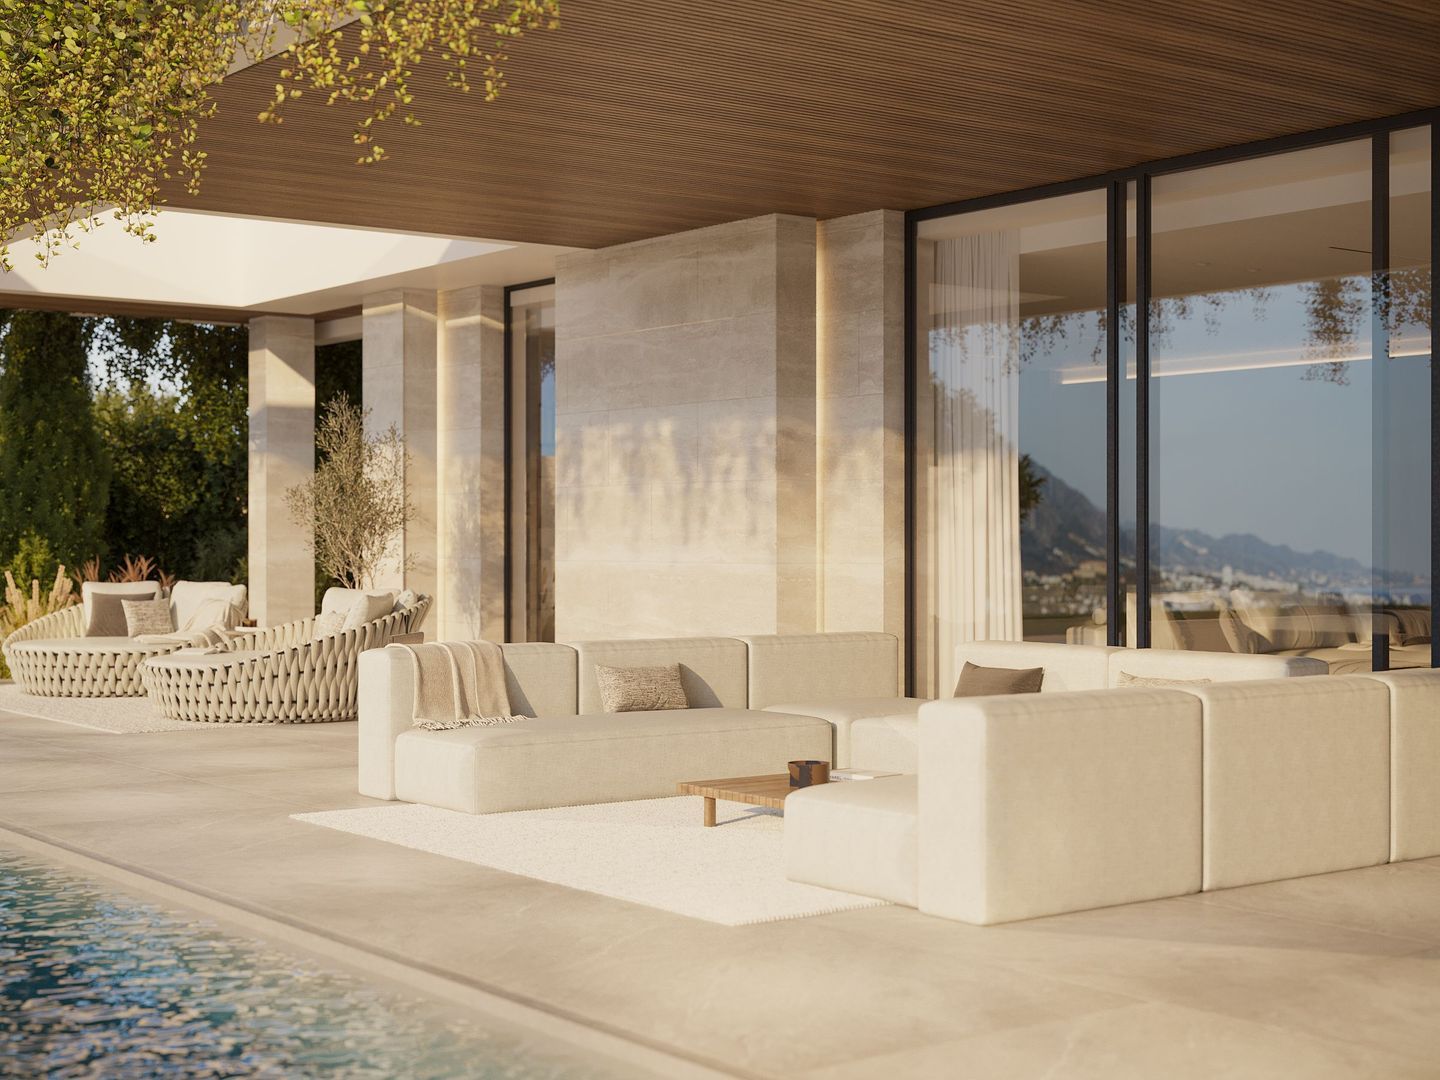 One of the most exciting property launches in Marbella, Benahavis foto-13